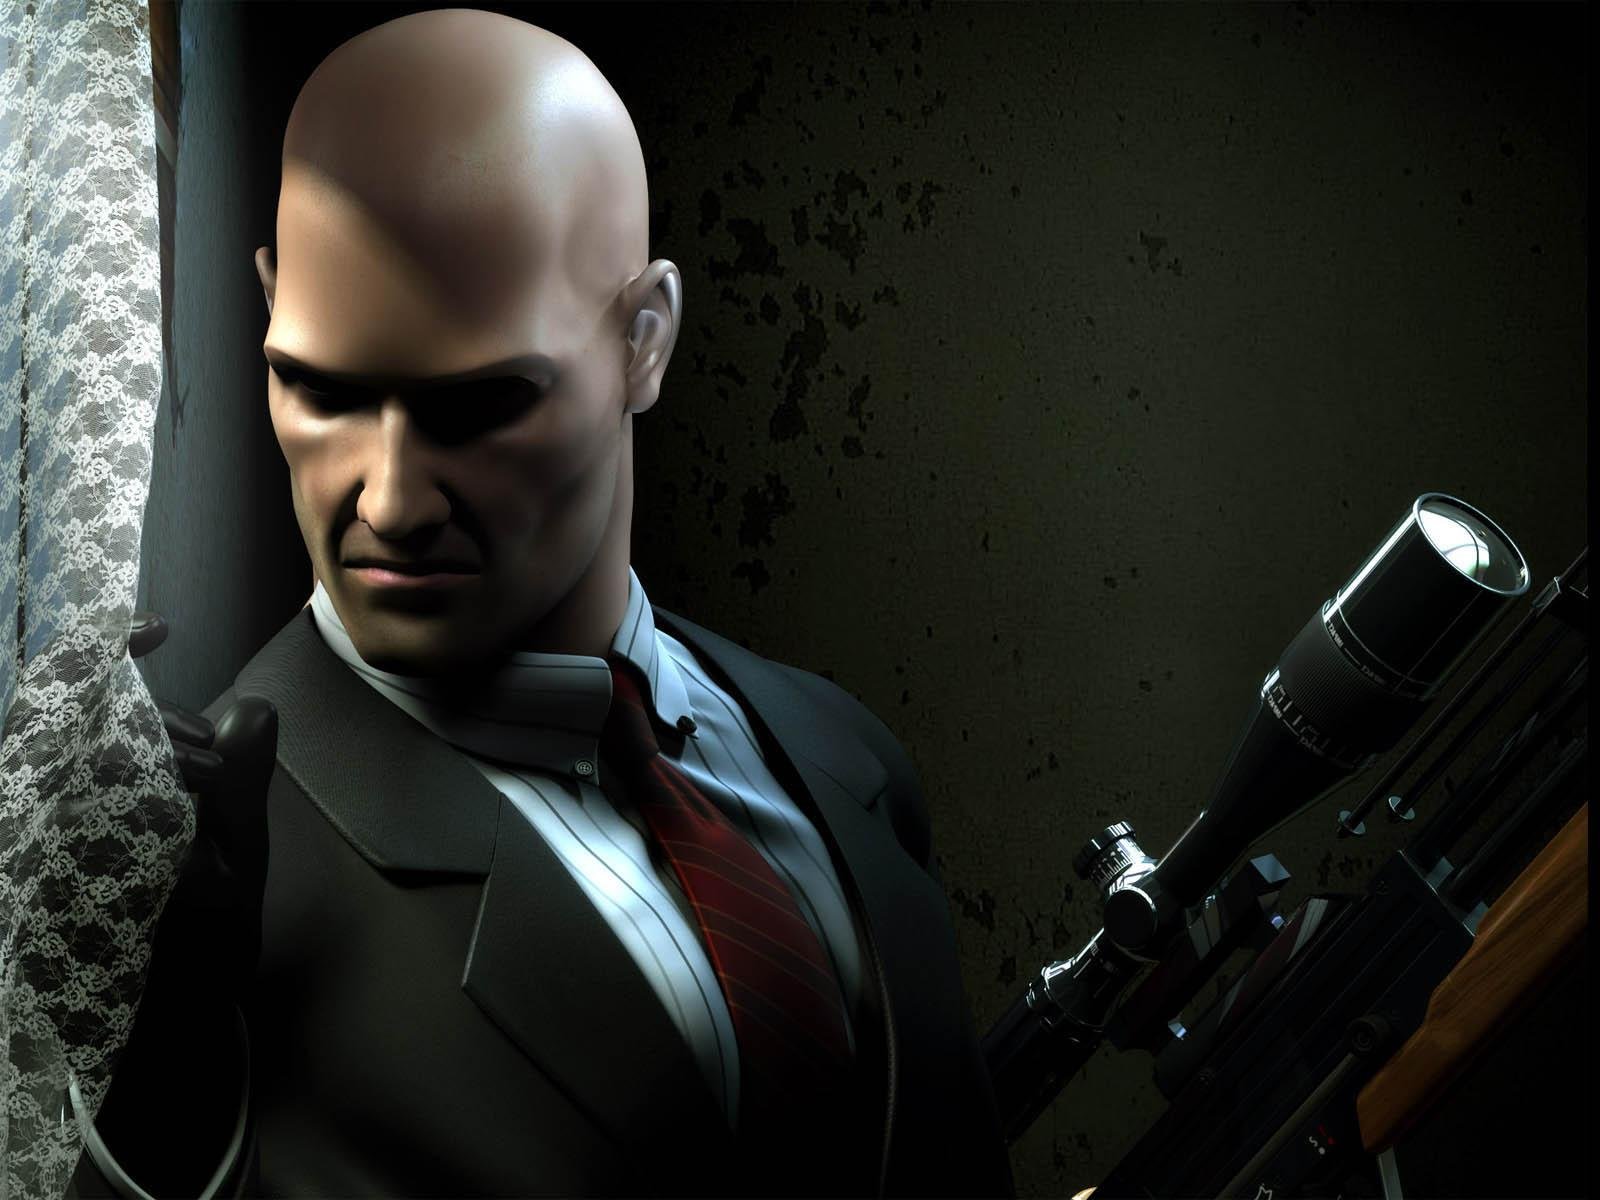 download hitman sniper 2 world of assassins for free